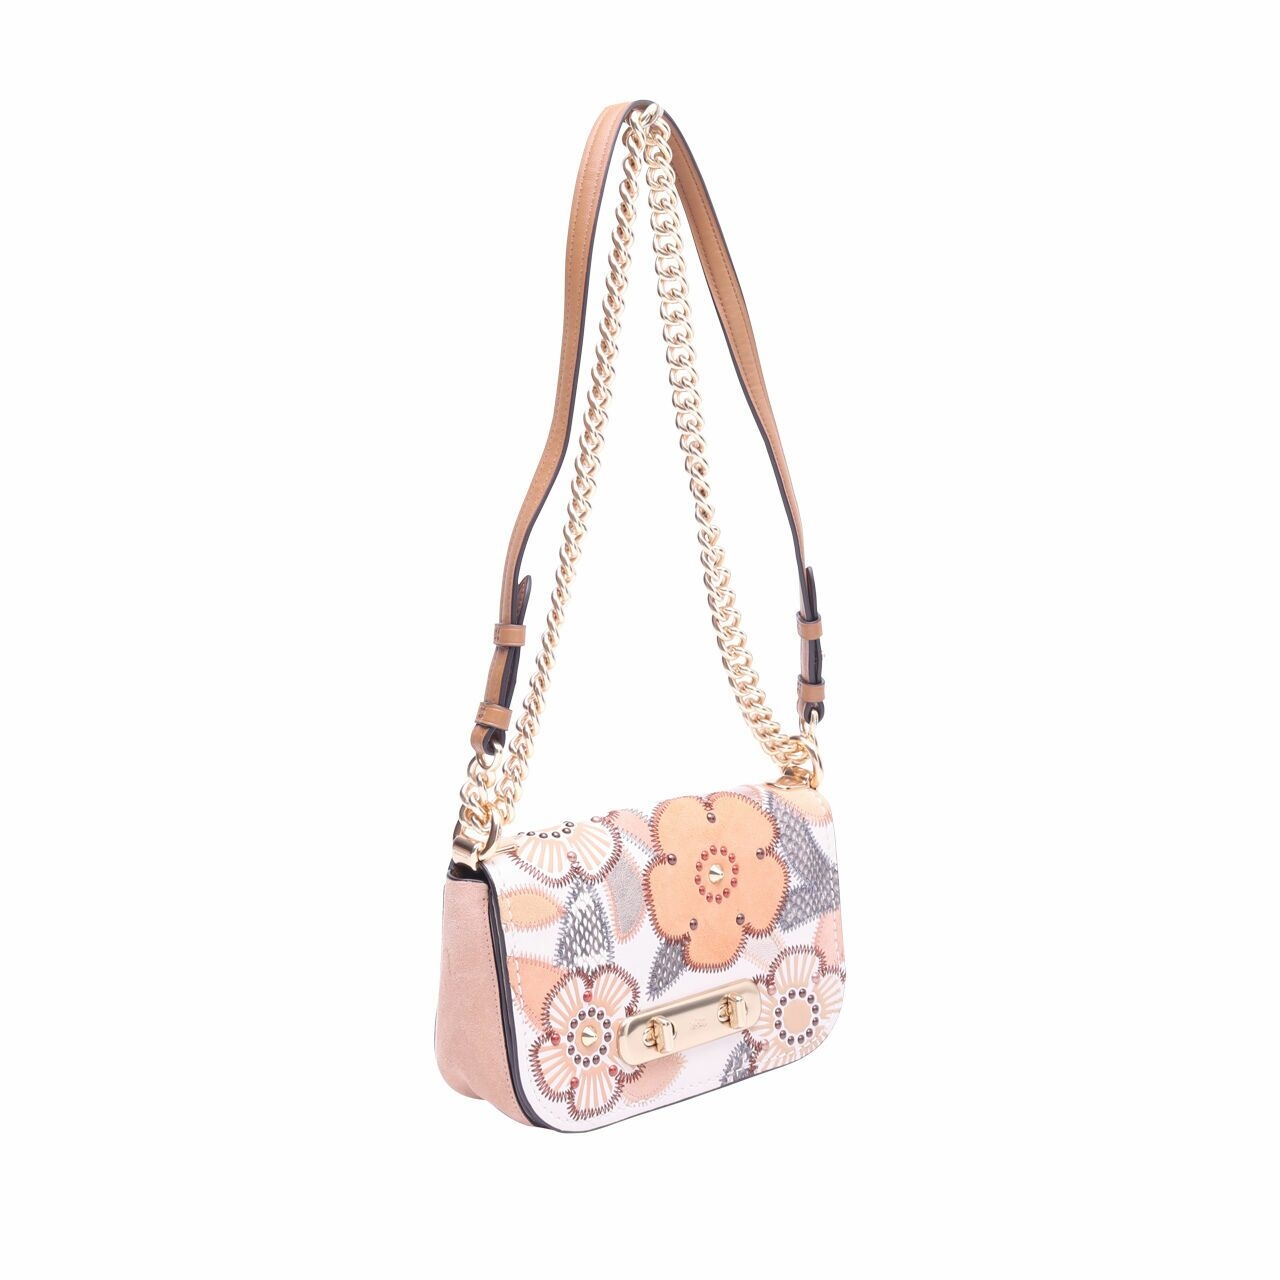 Coach Swagger 20 With Patchwork Tea Rose And Snakeskin Detail In Chalk Multi/light Gold  Shoulder Bag